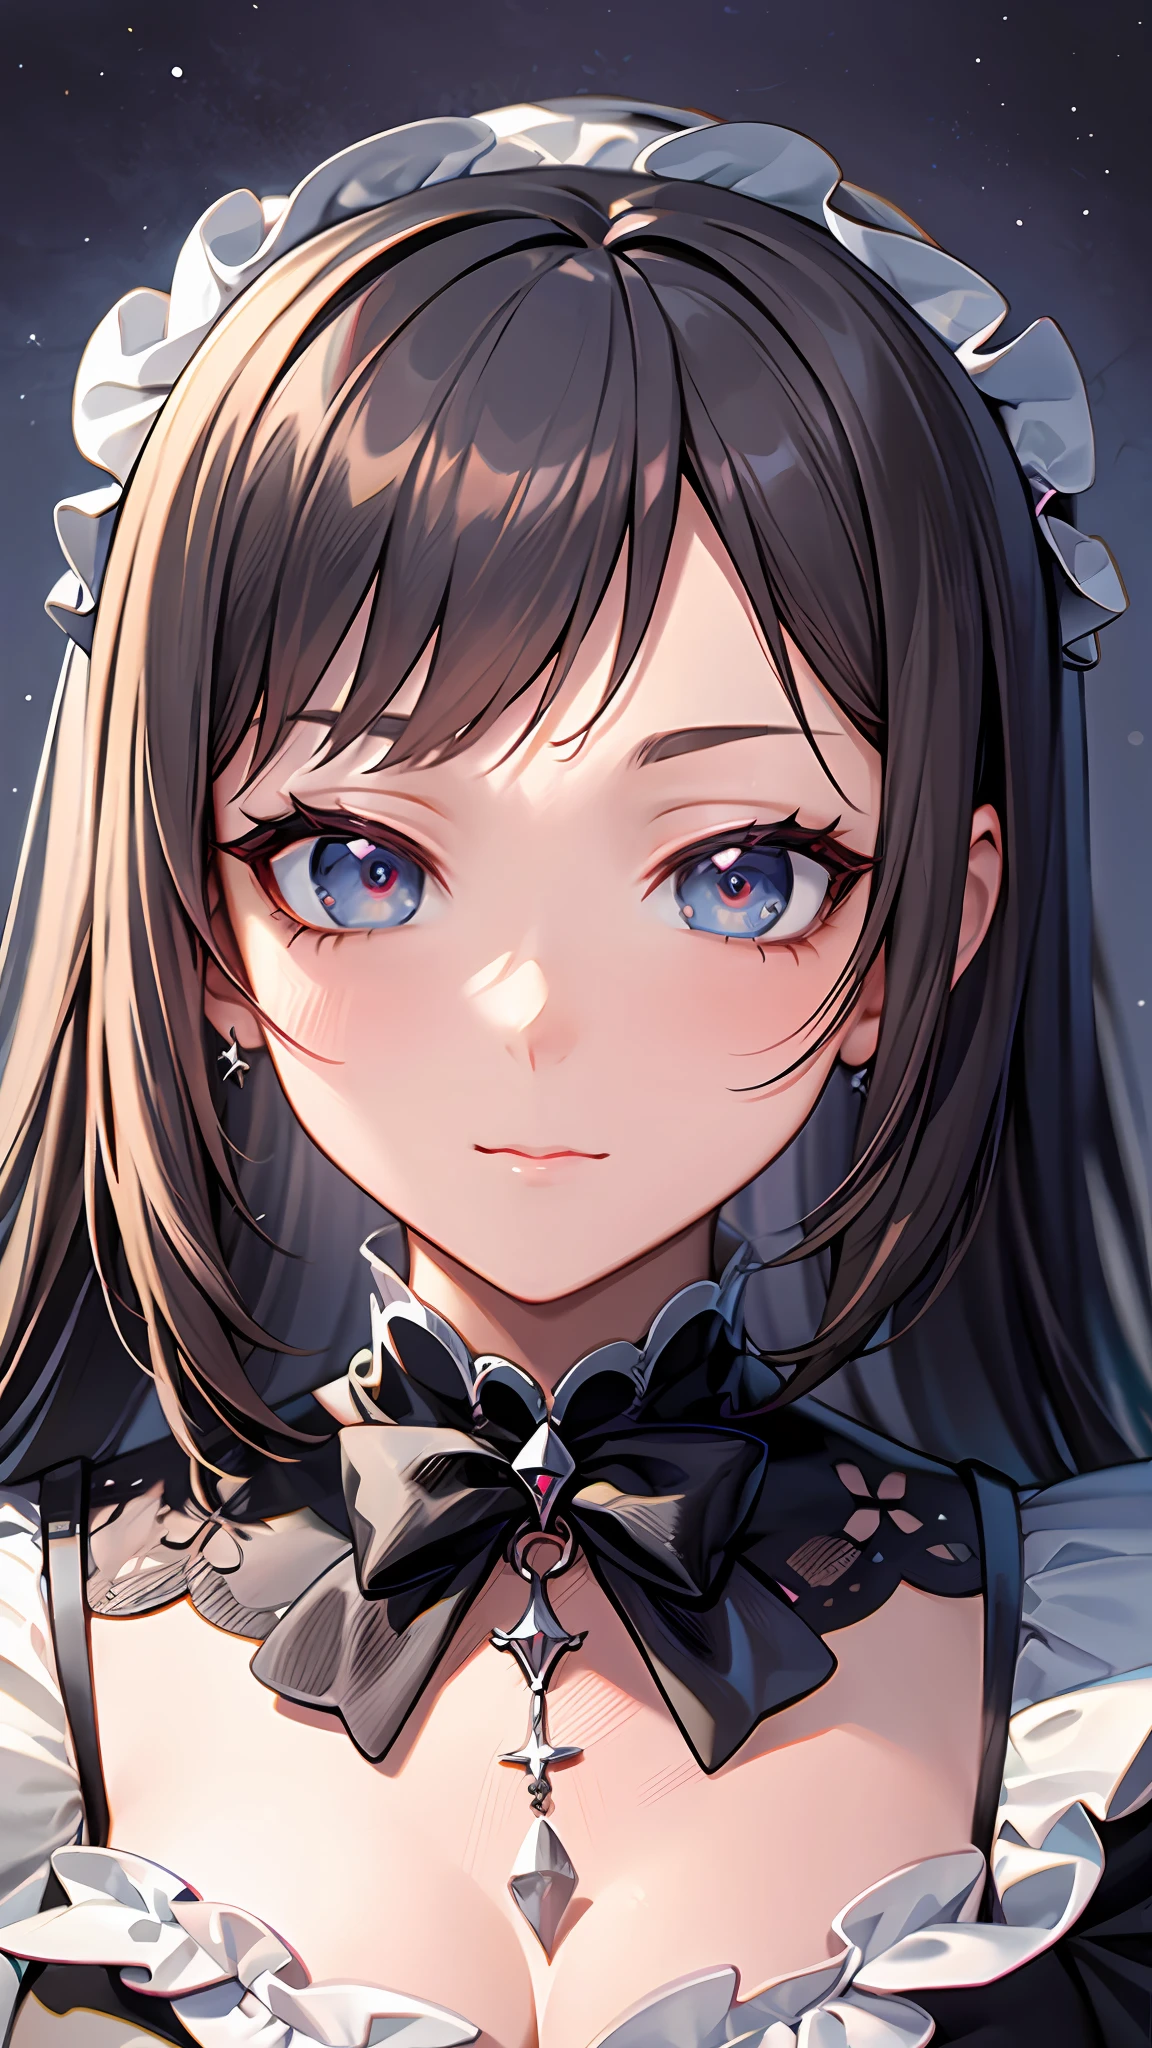 Close up portrait of woman in dress in white and black dress、Gothic Otome anime girl、anime girl wearing a black dress、Cute anime waifu in a nice dress、Anime girl in maid costume、Elegant Gothic princess、guweiz、Gwaits at Pixiv Art Station、Gwaitz at Art Station pixiv、Beautiful anime girl、Light smile